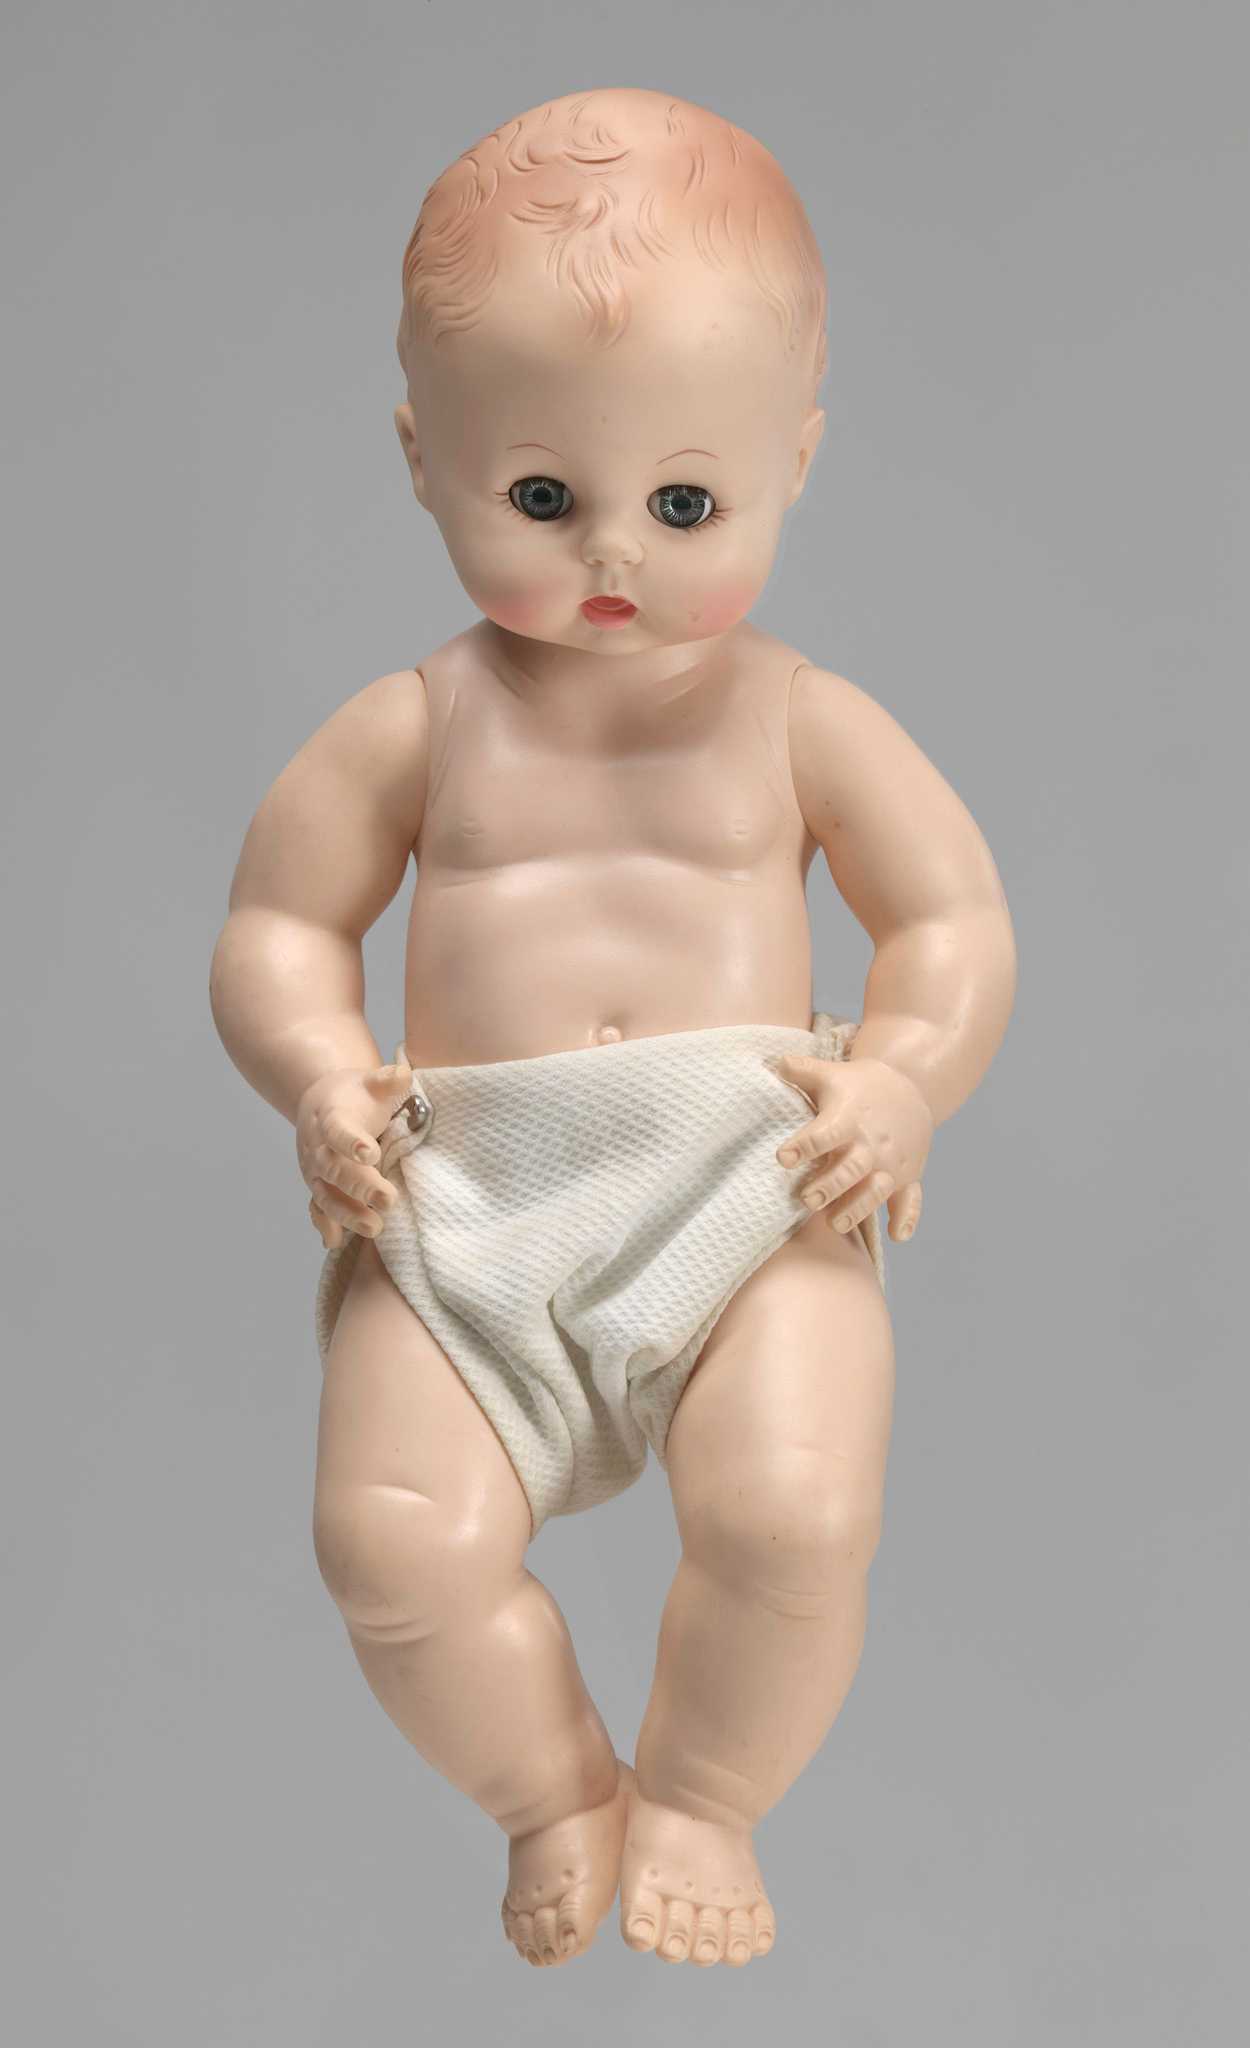 A white baby doll. The doll has open- and close- eye functionality and wears a cloth diaper.